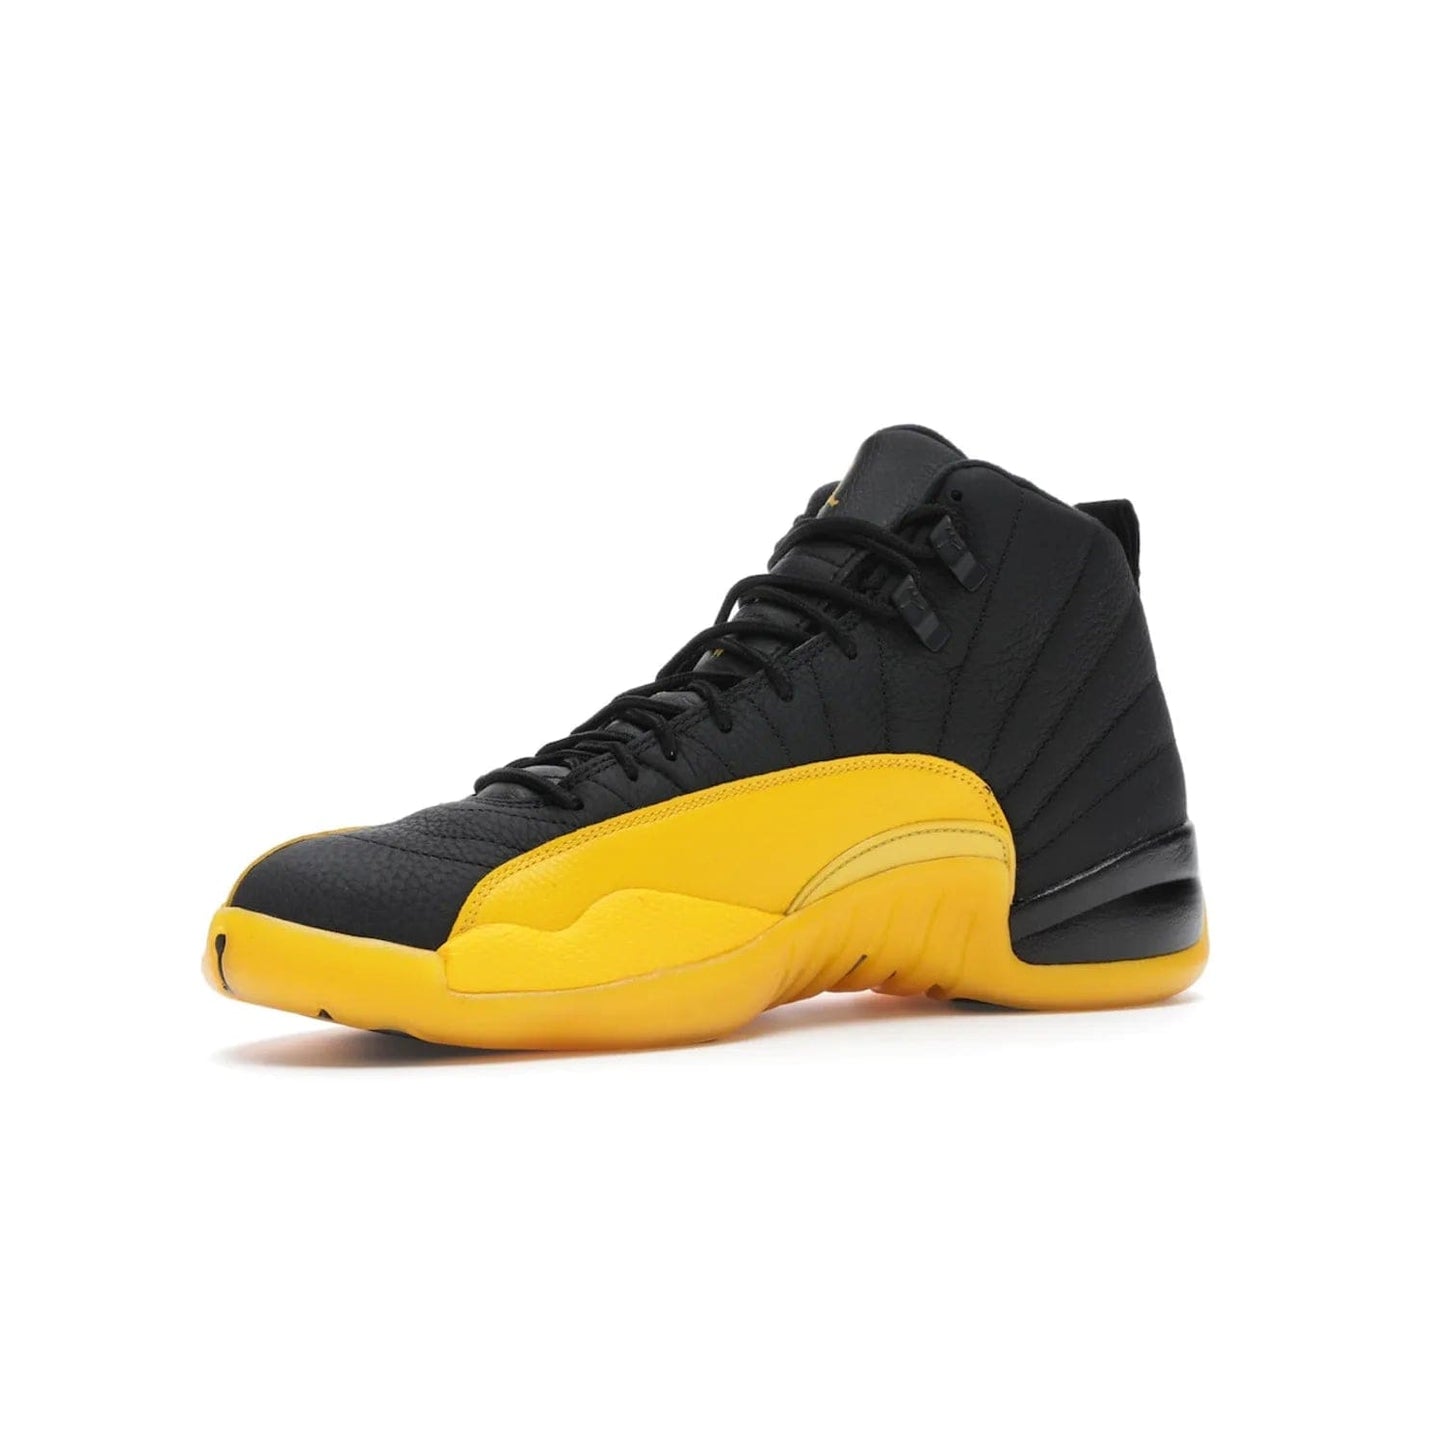 Jordan 12 Retro Black University Gold - Image 16 - Only at www.BallersClubKickz.com - This Jordan 12 Retro features a black tumbled leather upper and University Gold accents for a modern twist. Boasting Jordan "Two Three" branding and a yellow sole, these shoes will elevate your wardrobe. Fresh, sleek, and one of a kind - the Jordan 12 University Gold is your summer sneaker.